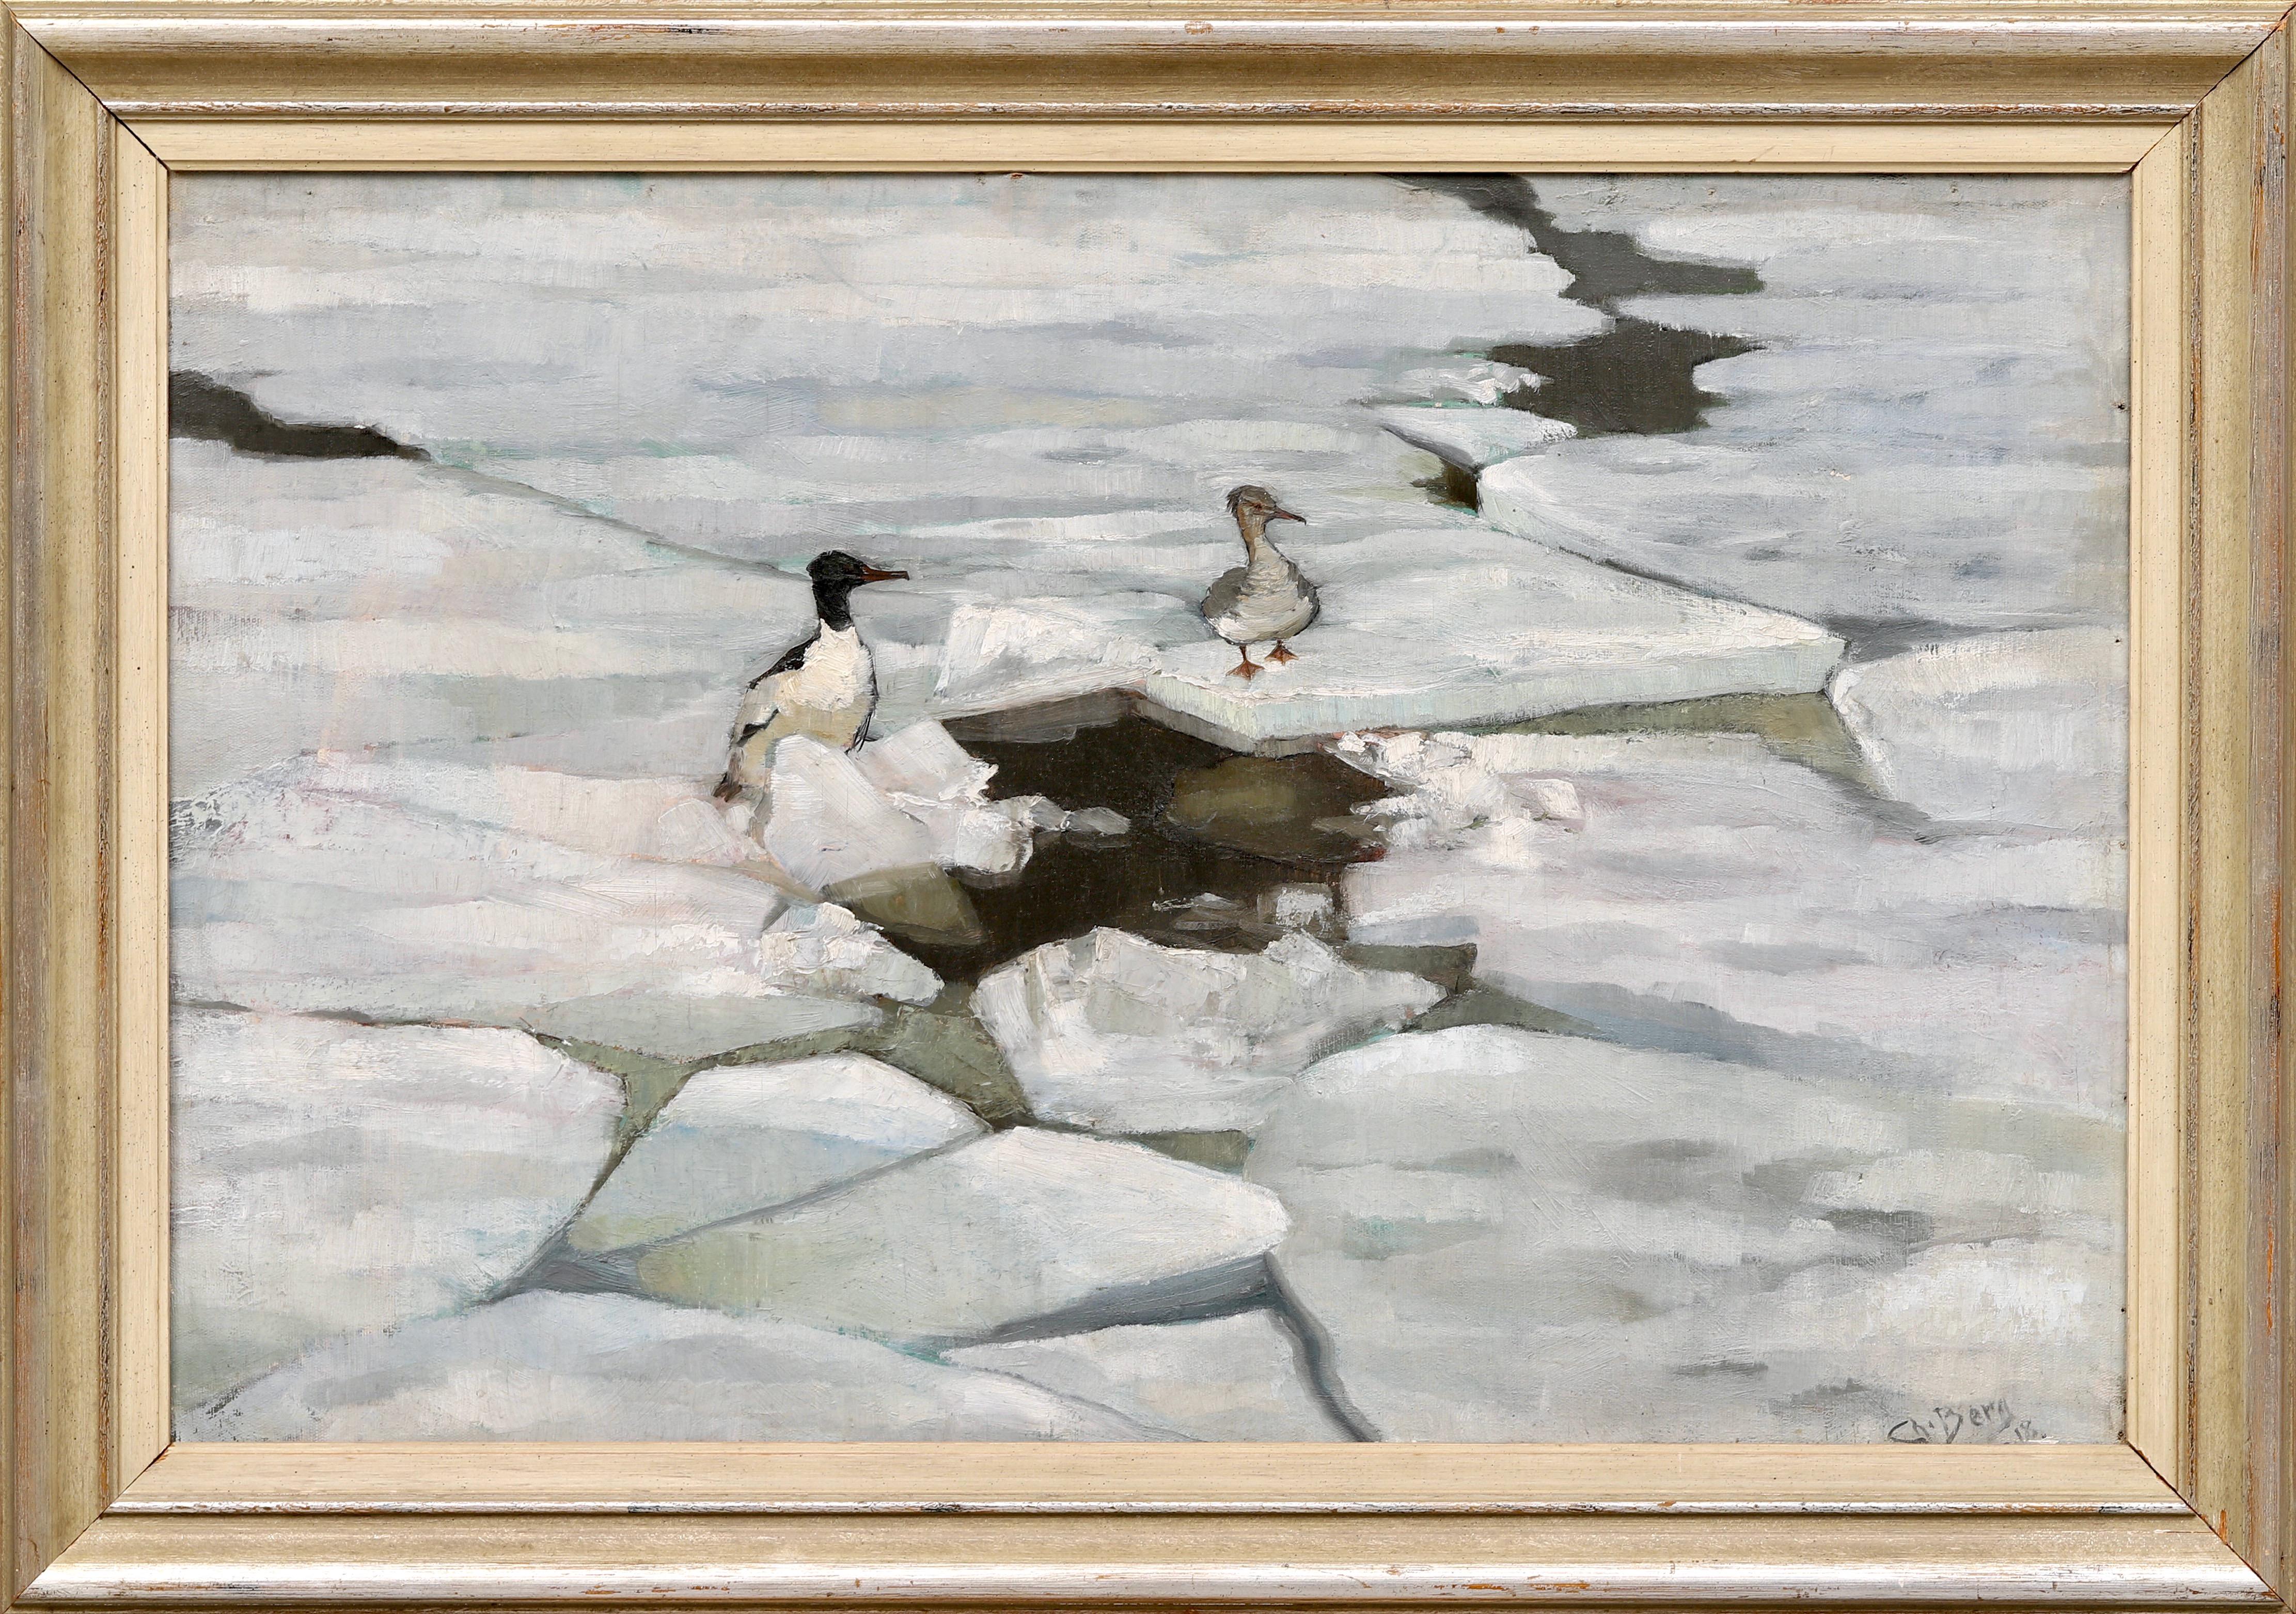 A female and male Goosander bird on ice floes. In the center of the painting there is a smaller opening in the ice covered waters. This painting, by Christian Berg (1893-1976) is quite interesting and unusual for his works. It is signed 